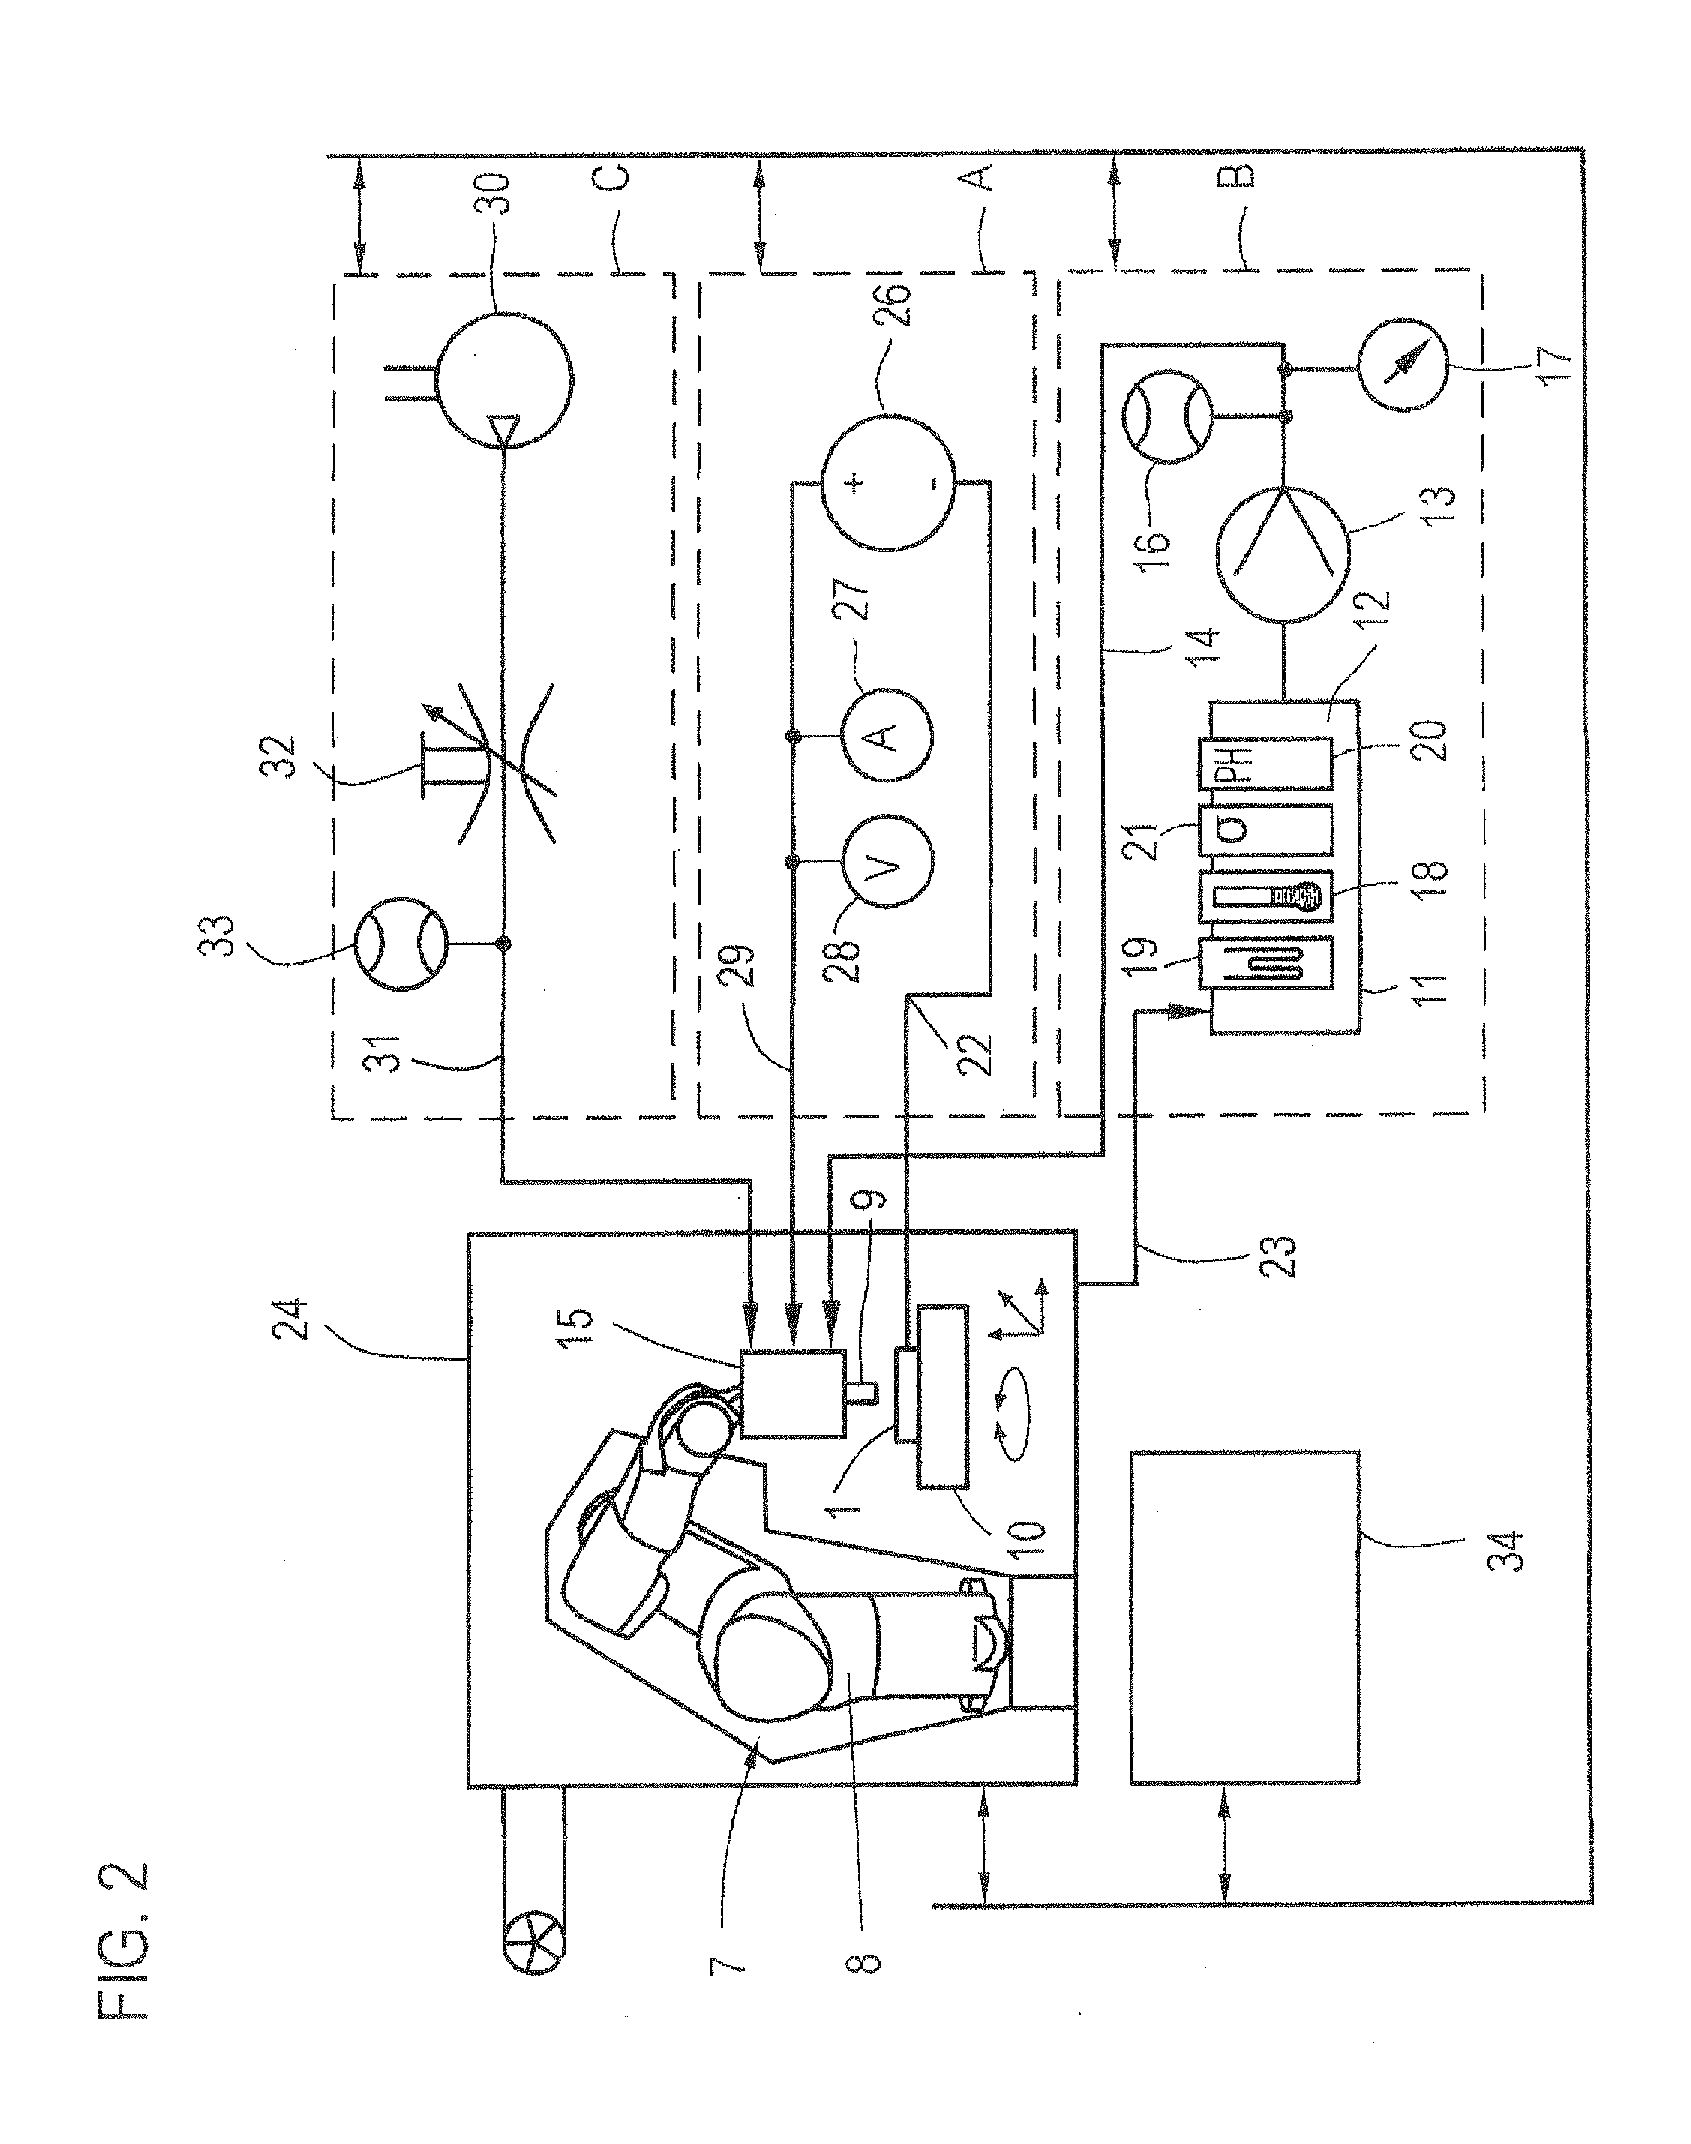 Method for producing a metal component